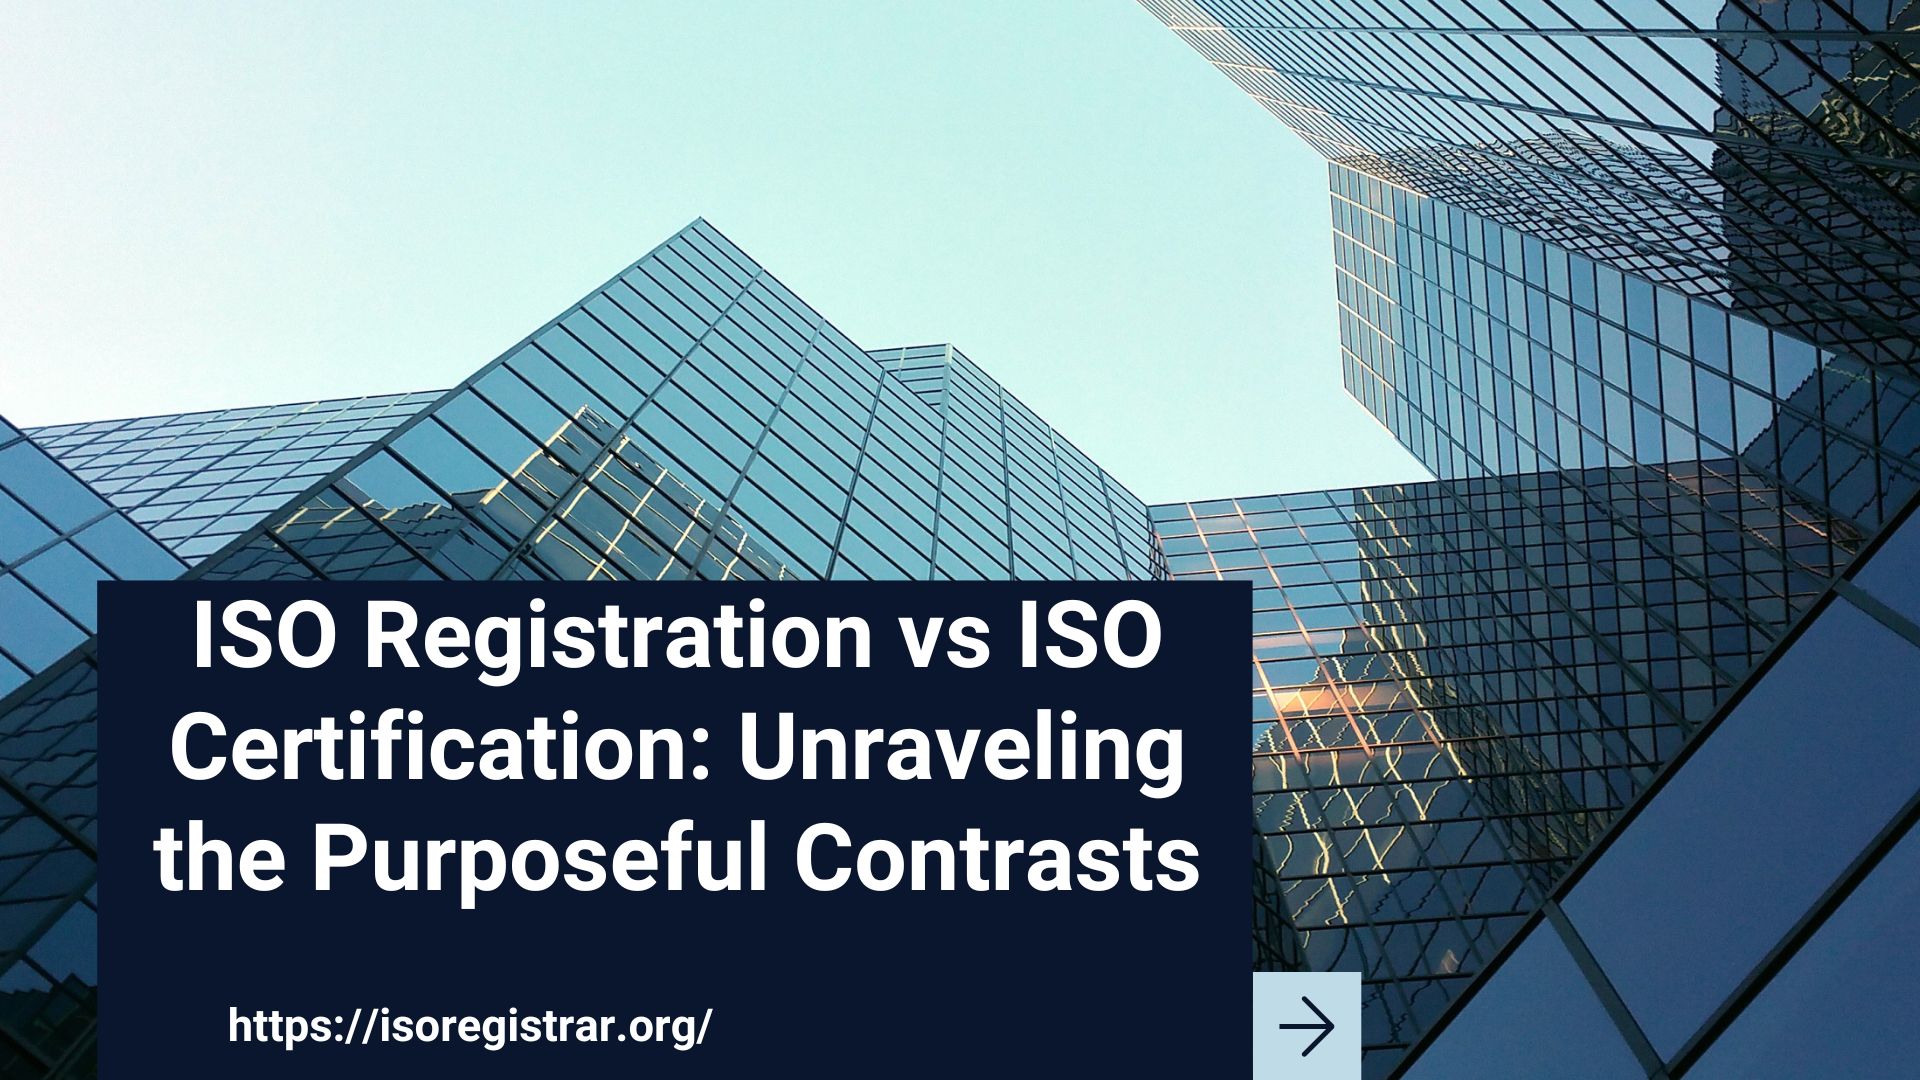 ISO Registration vs ISO Certification: Unraveling the Purposeful Contrasts